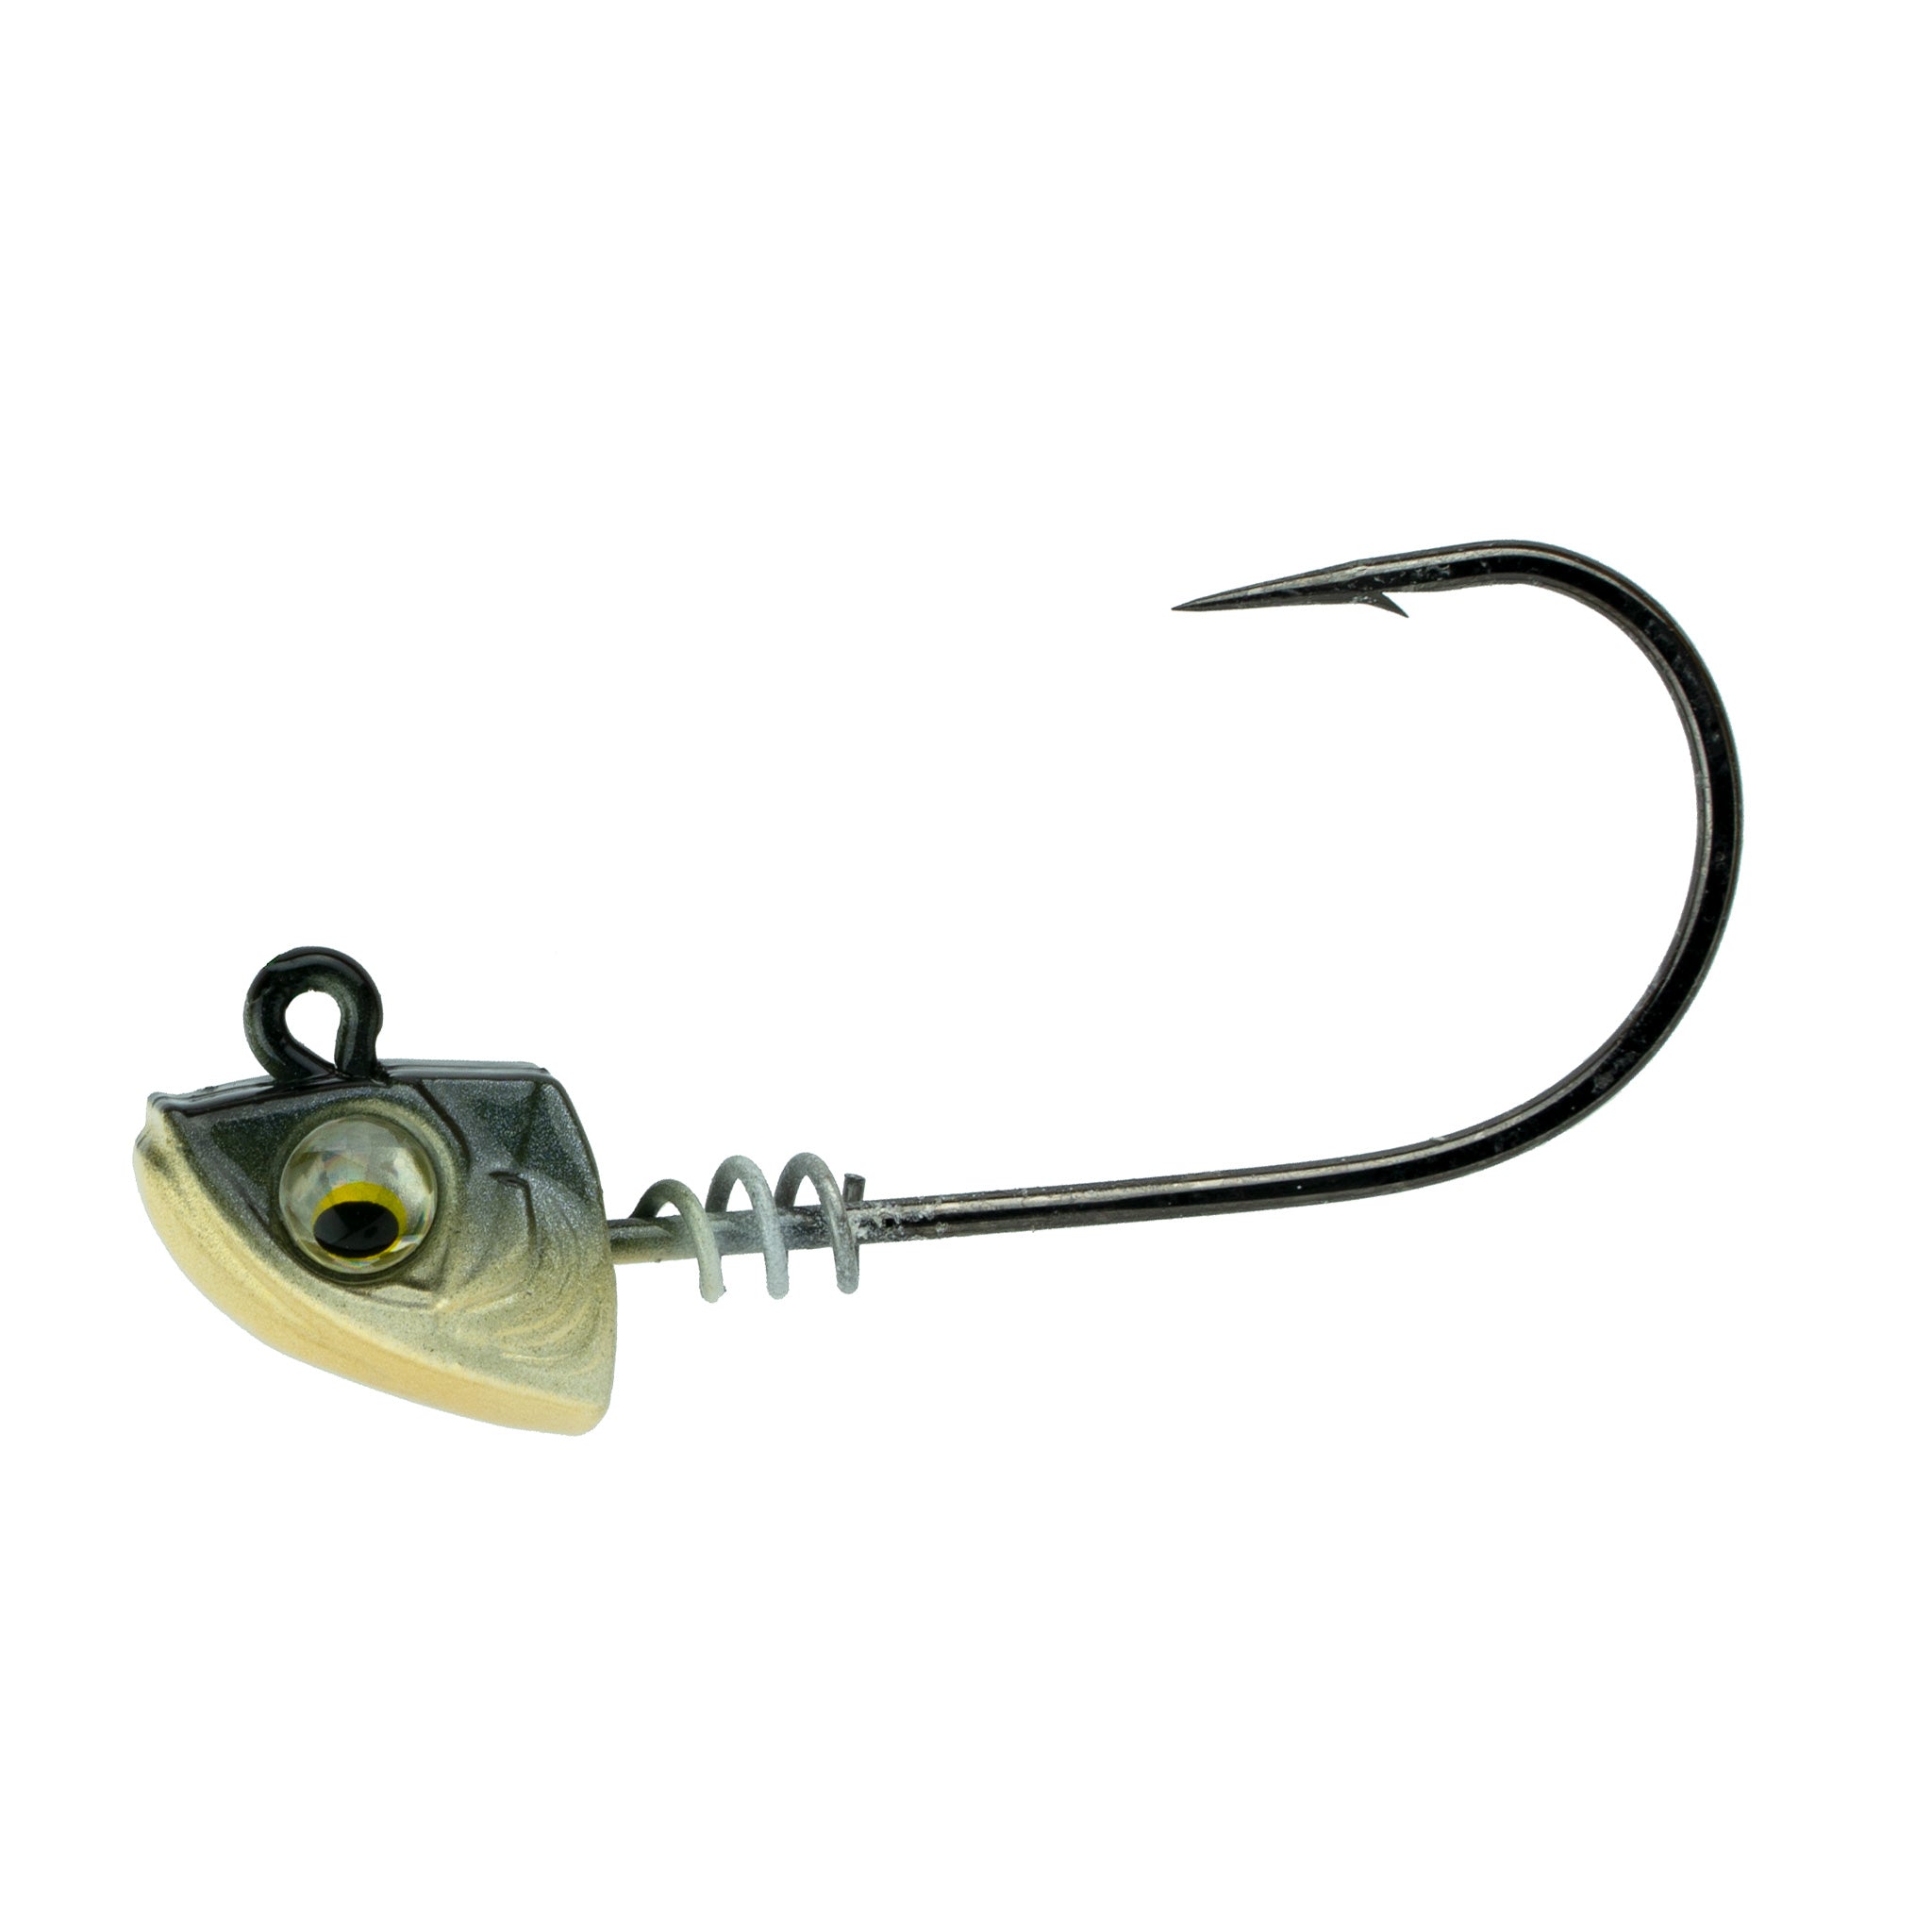 Why are swimbait heads so pricey? - Fishing Tackle - Bass Fishing Forums